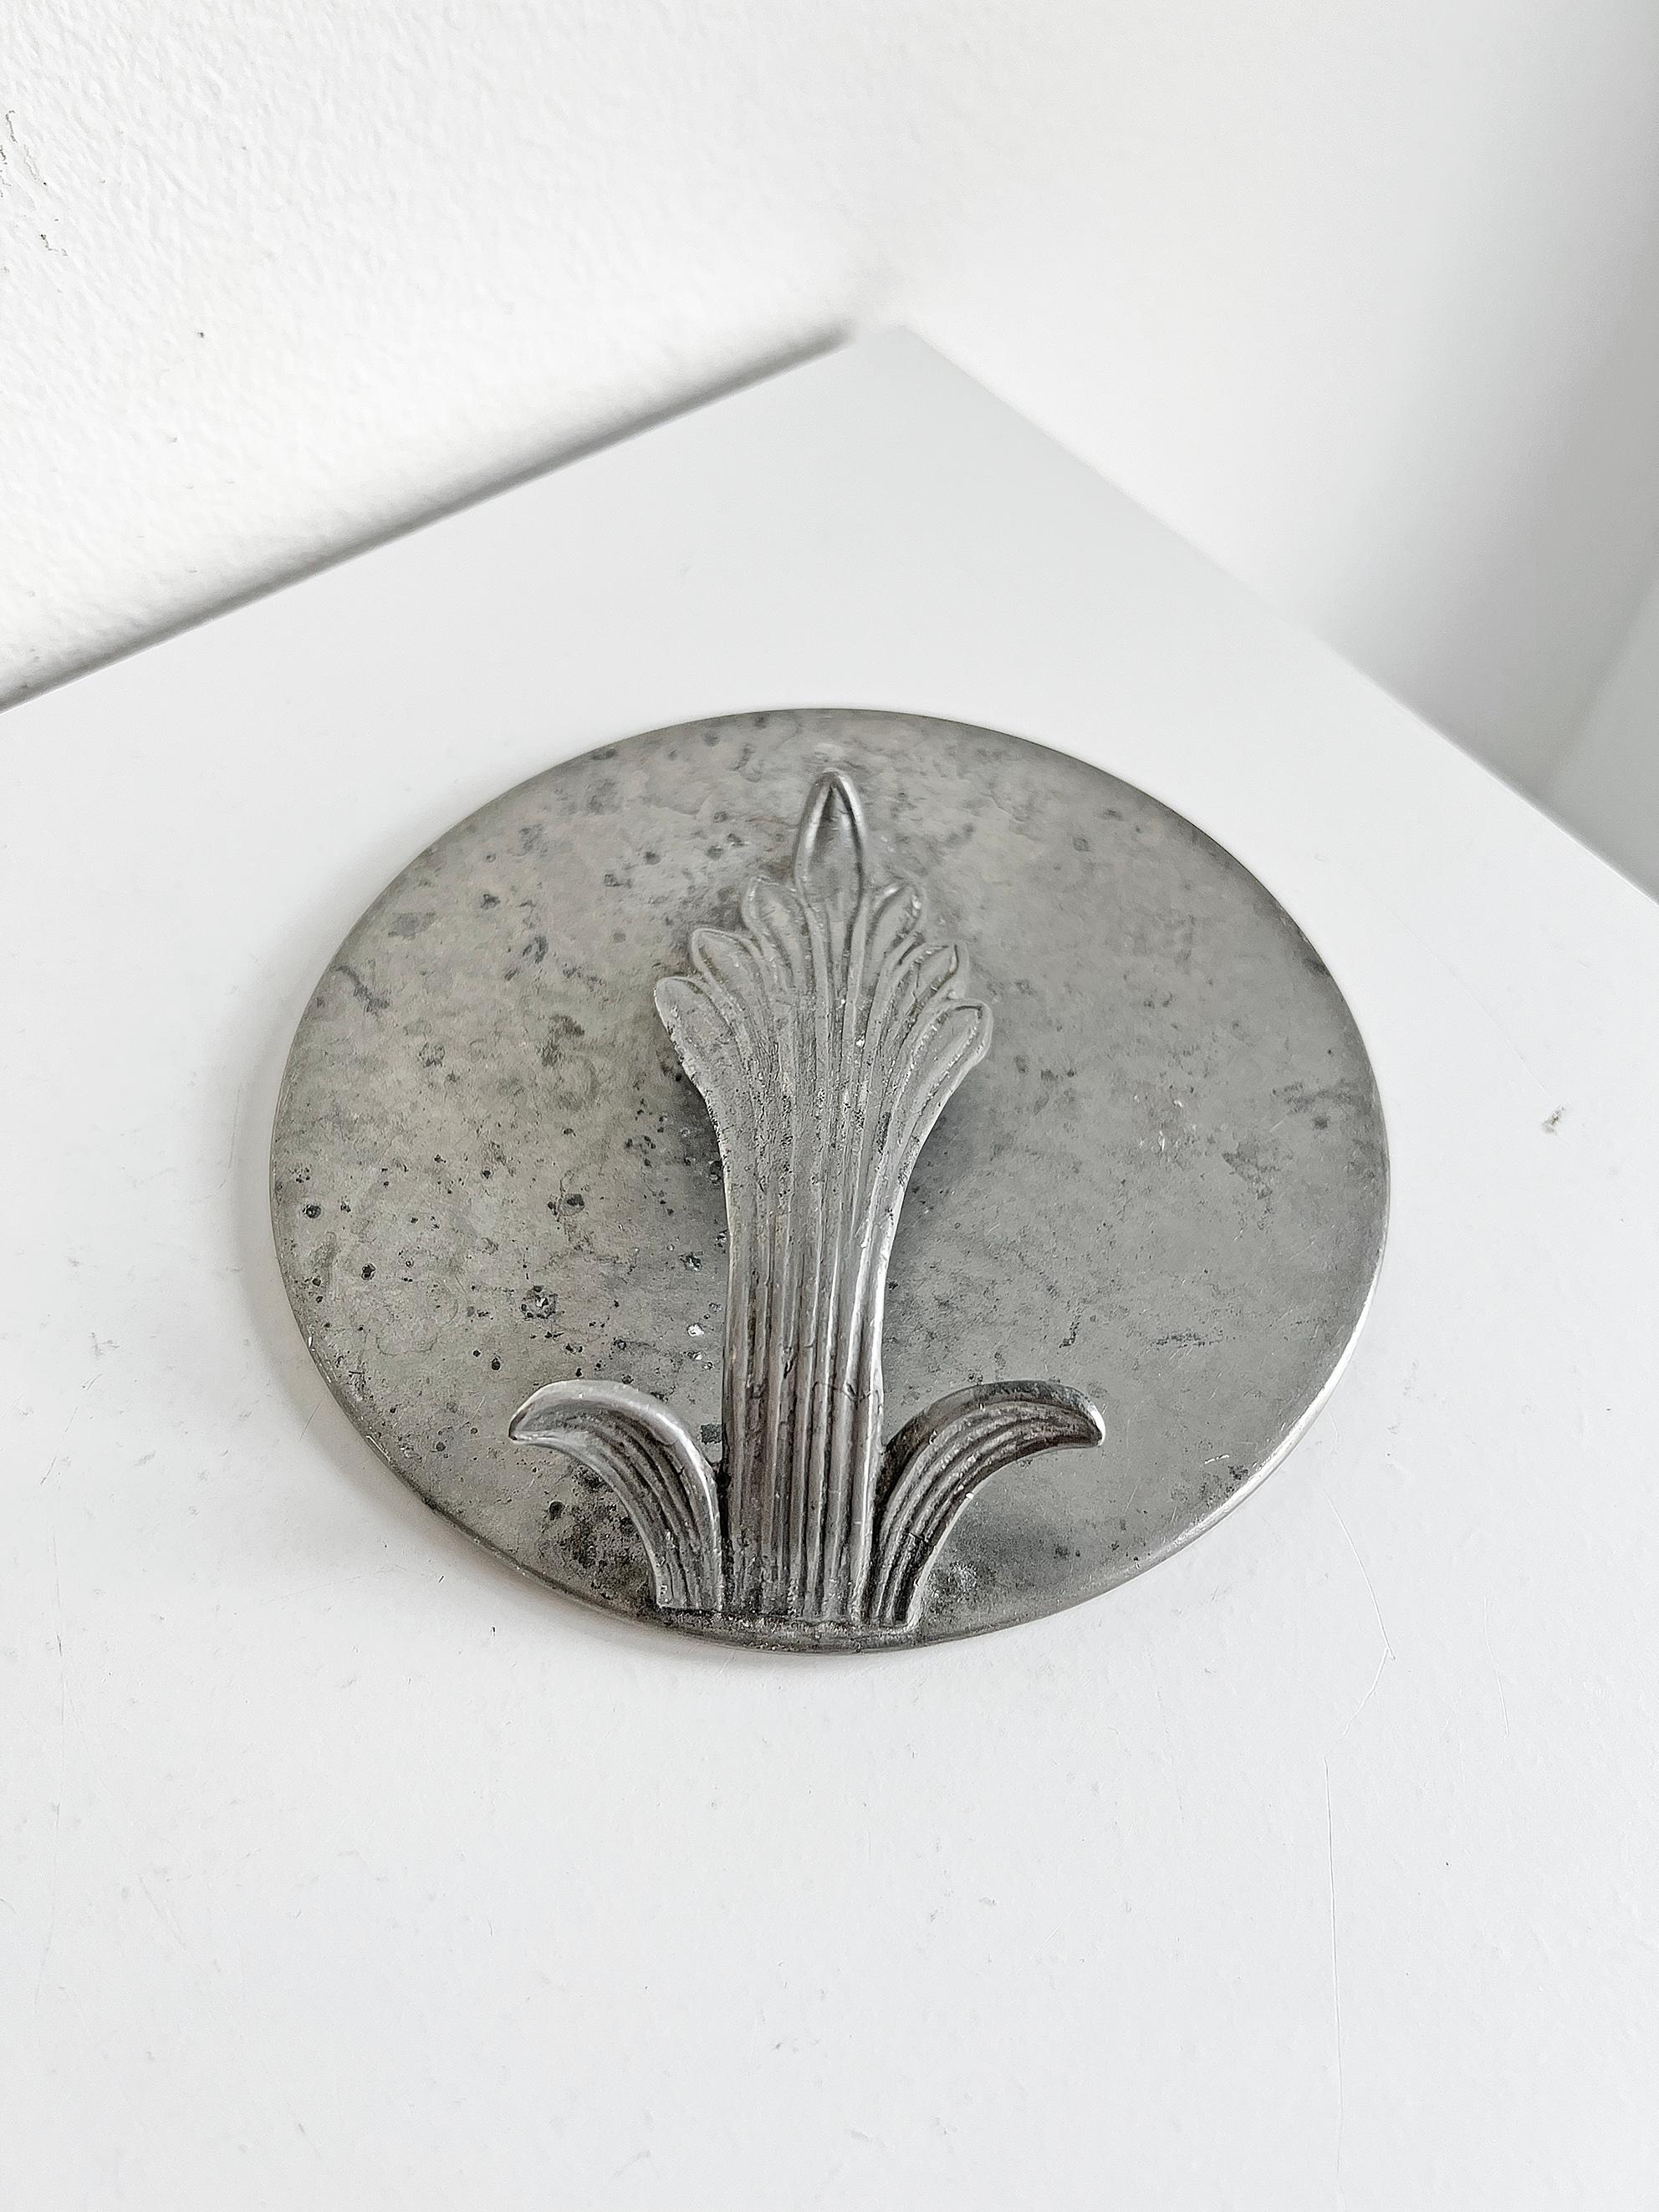 Scandinavian modern pewter vanity mirror with a decorative handle, Sweden ca 1930's. 
Unknown designer and maker.
Marks and scratches. Original mirror with slight fading & a small chip (as seen on the last picture). 
The mirror is a bit loose in